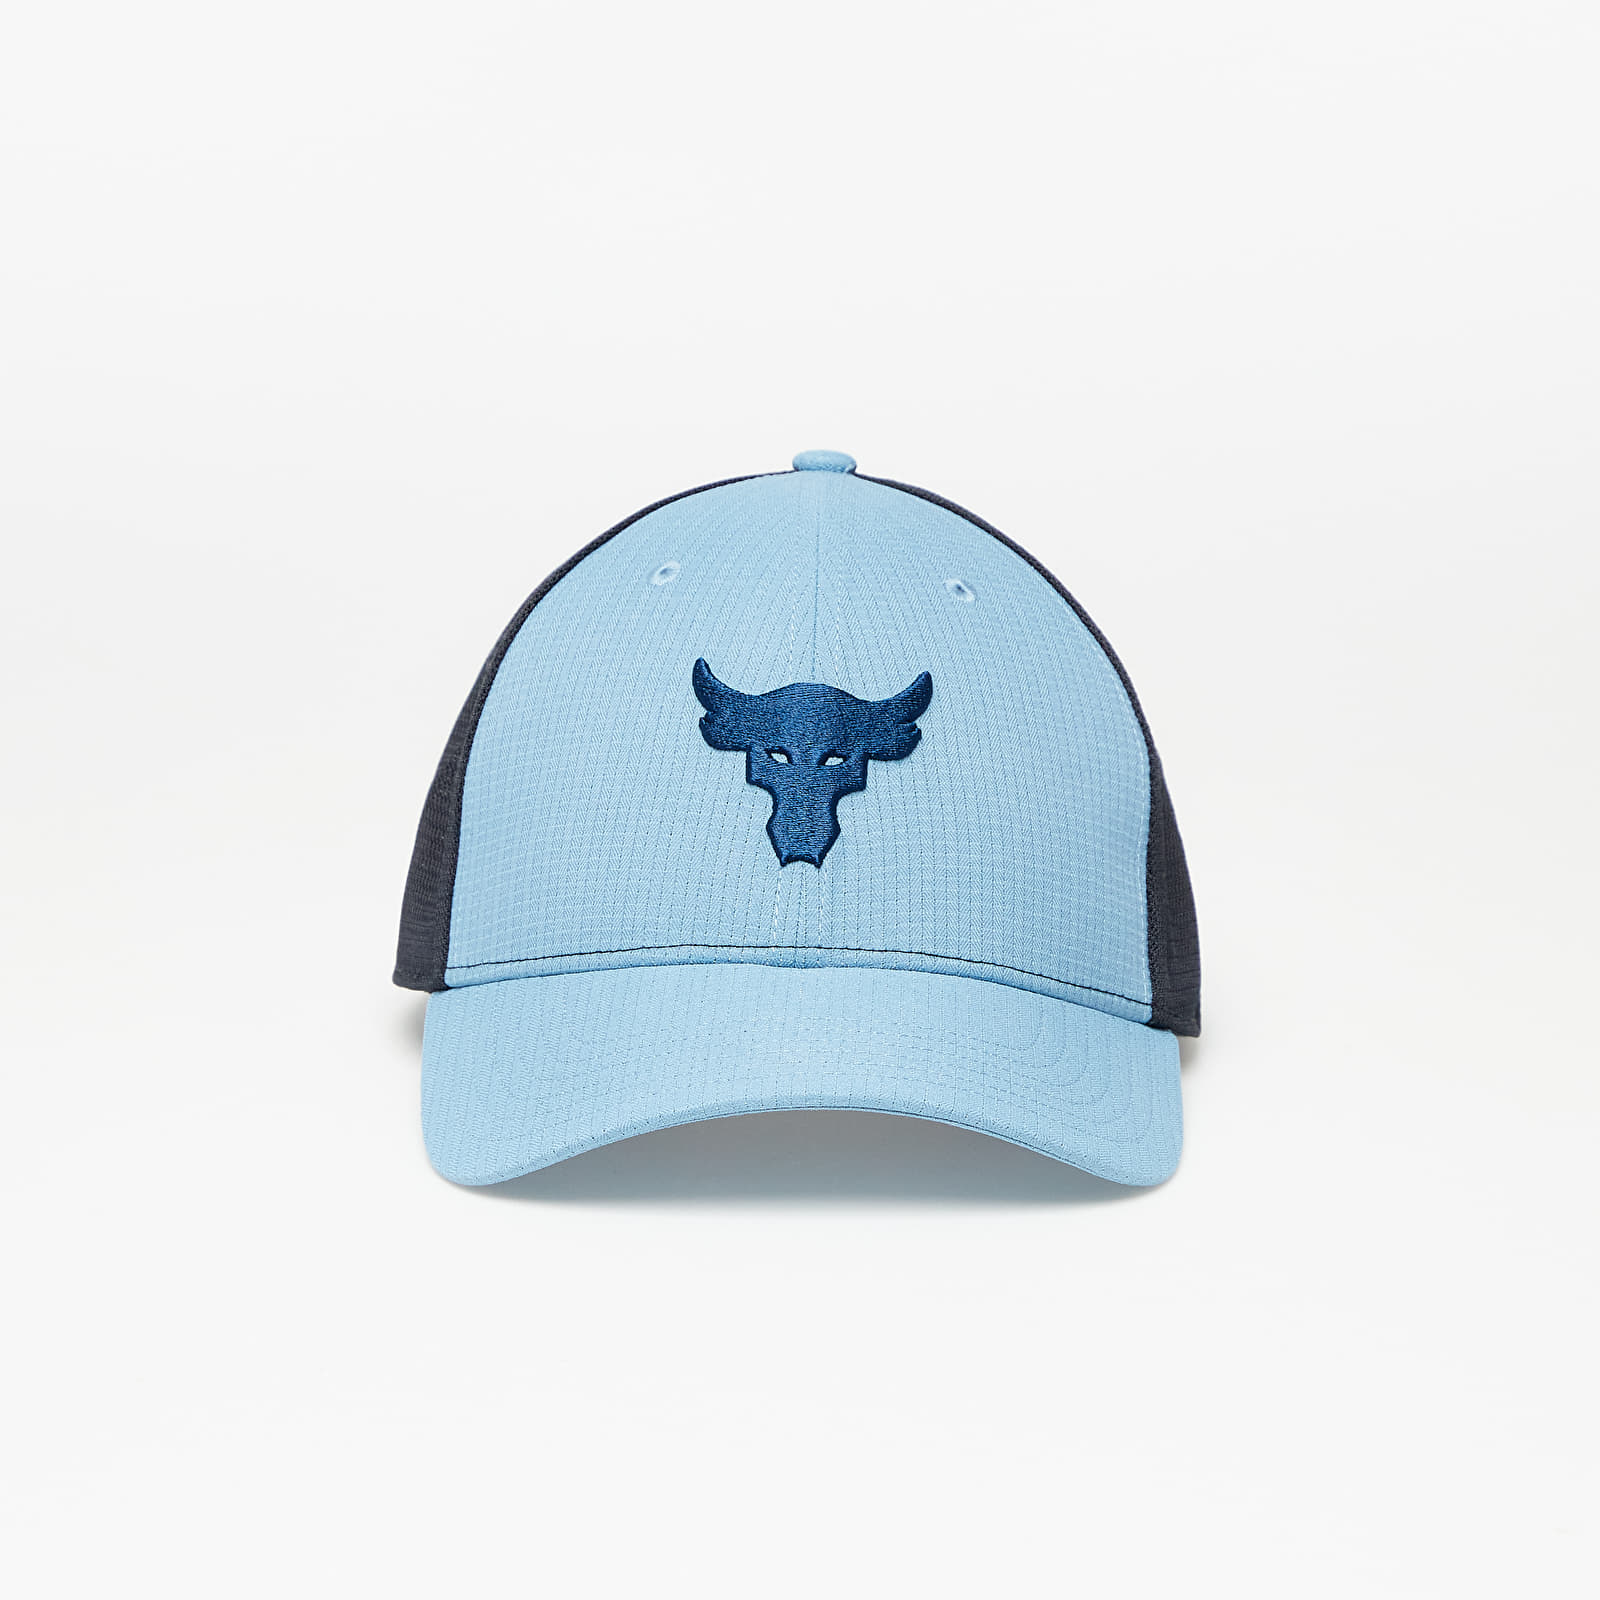 Шапки Under Armour Project Rock Trucker Mississippi/ Academy 910609